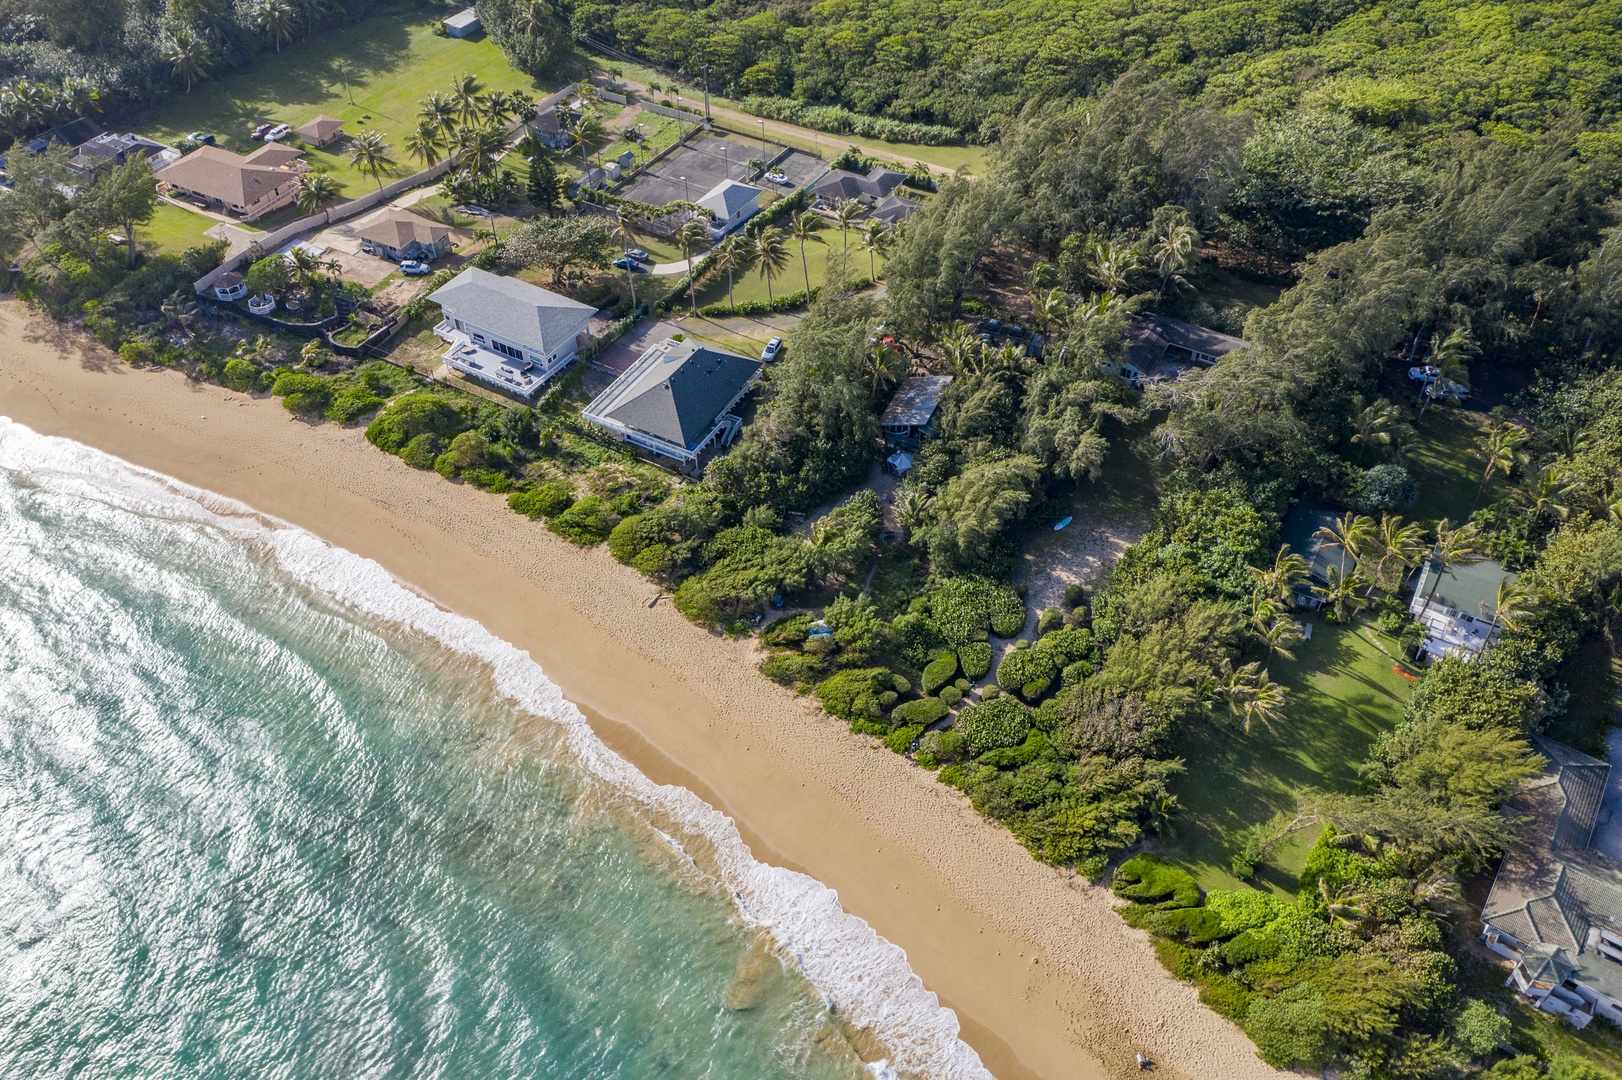 Kahuku Vacation Rentals, Hale Ula Ula - Calm shoreline year round, great for swimming in the summer, or splashing in the winter.